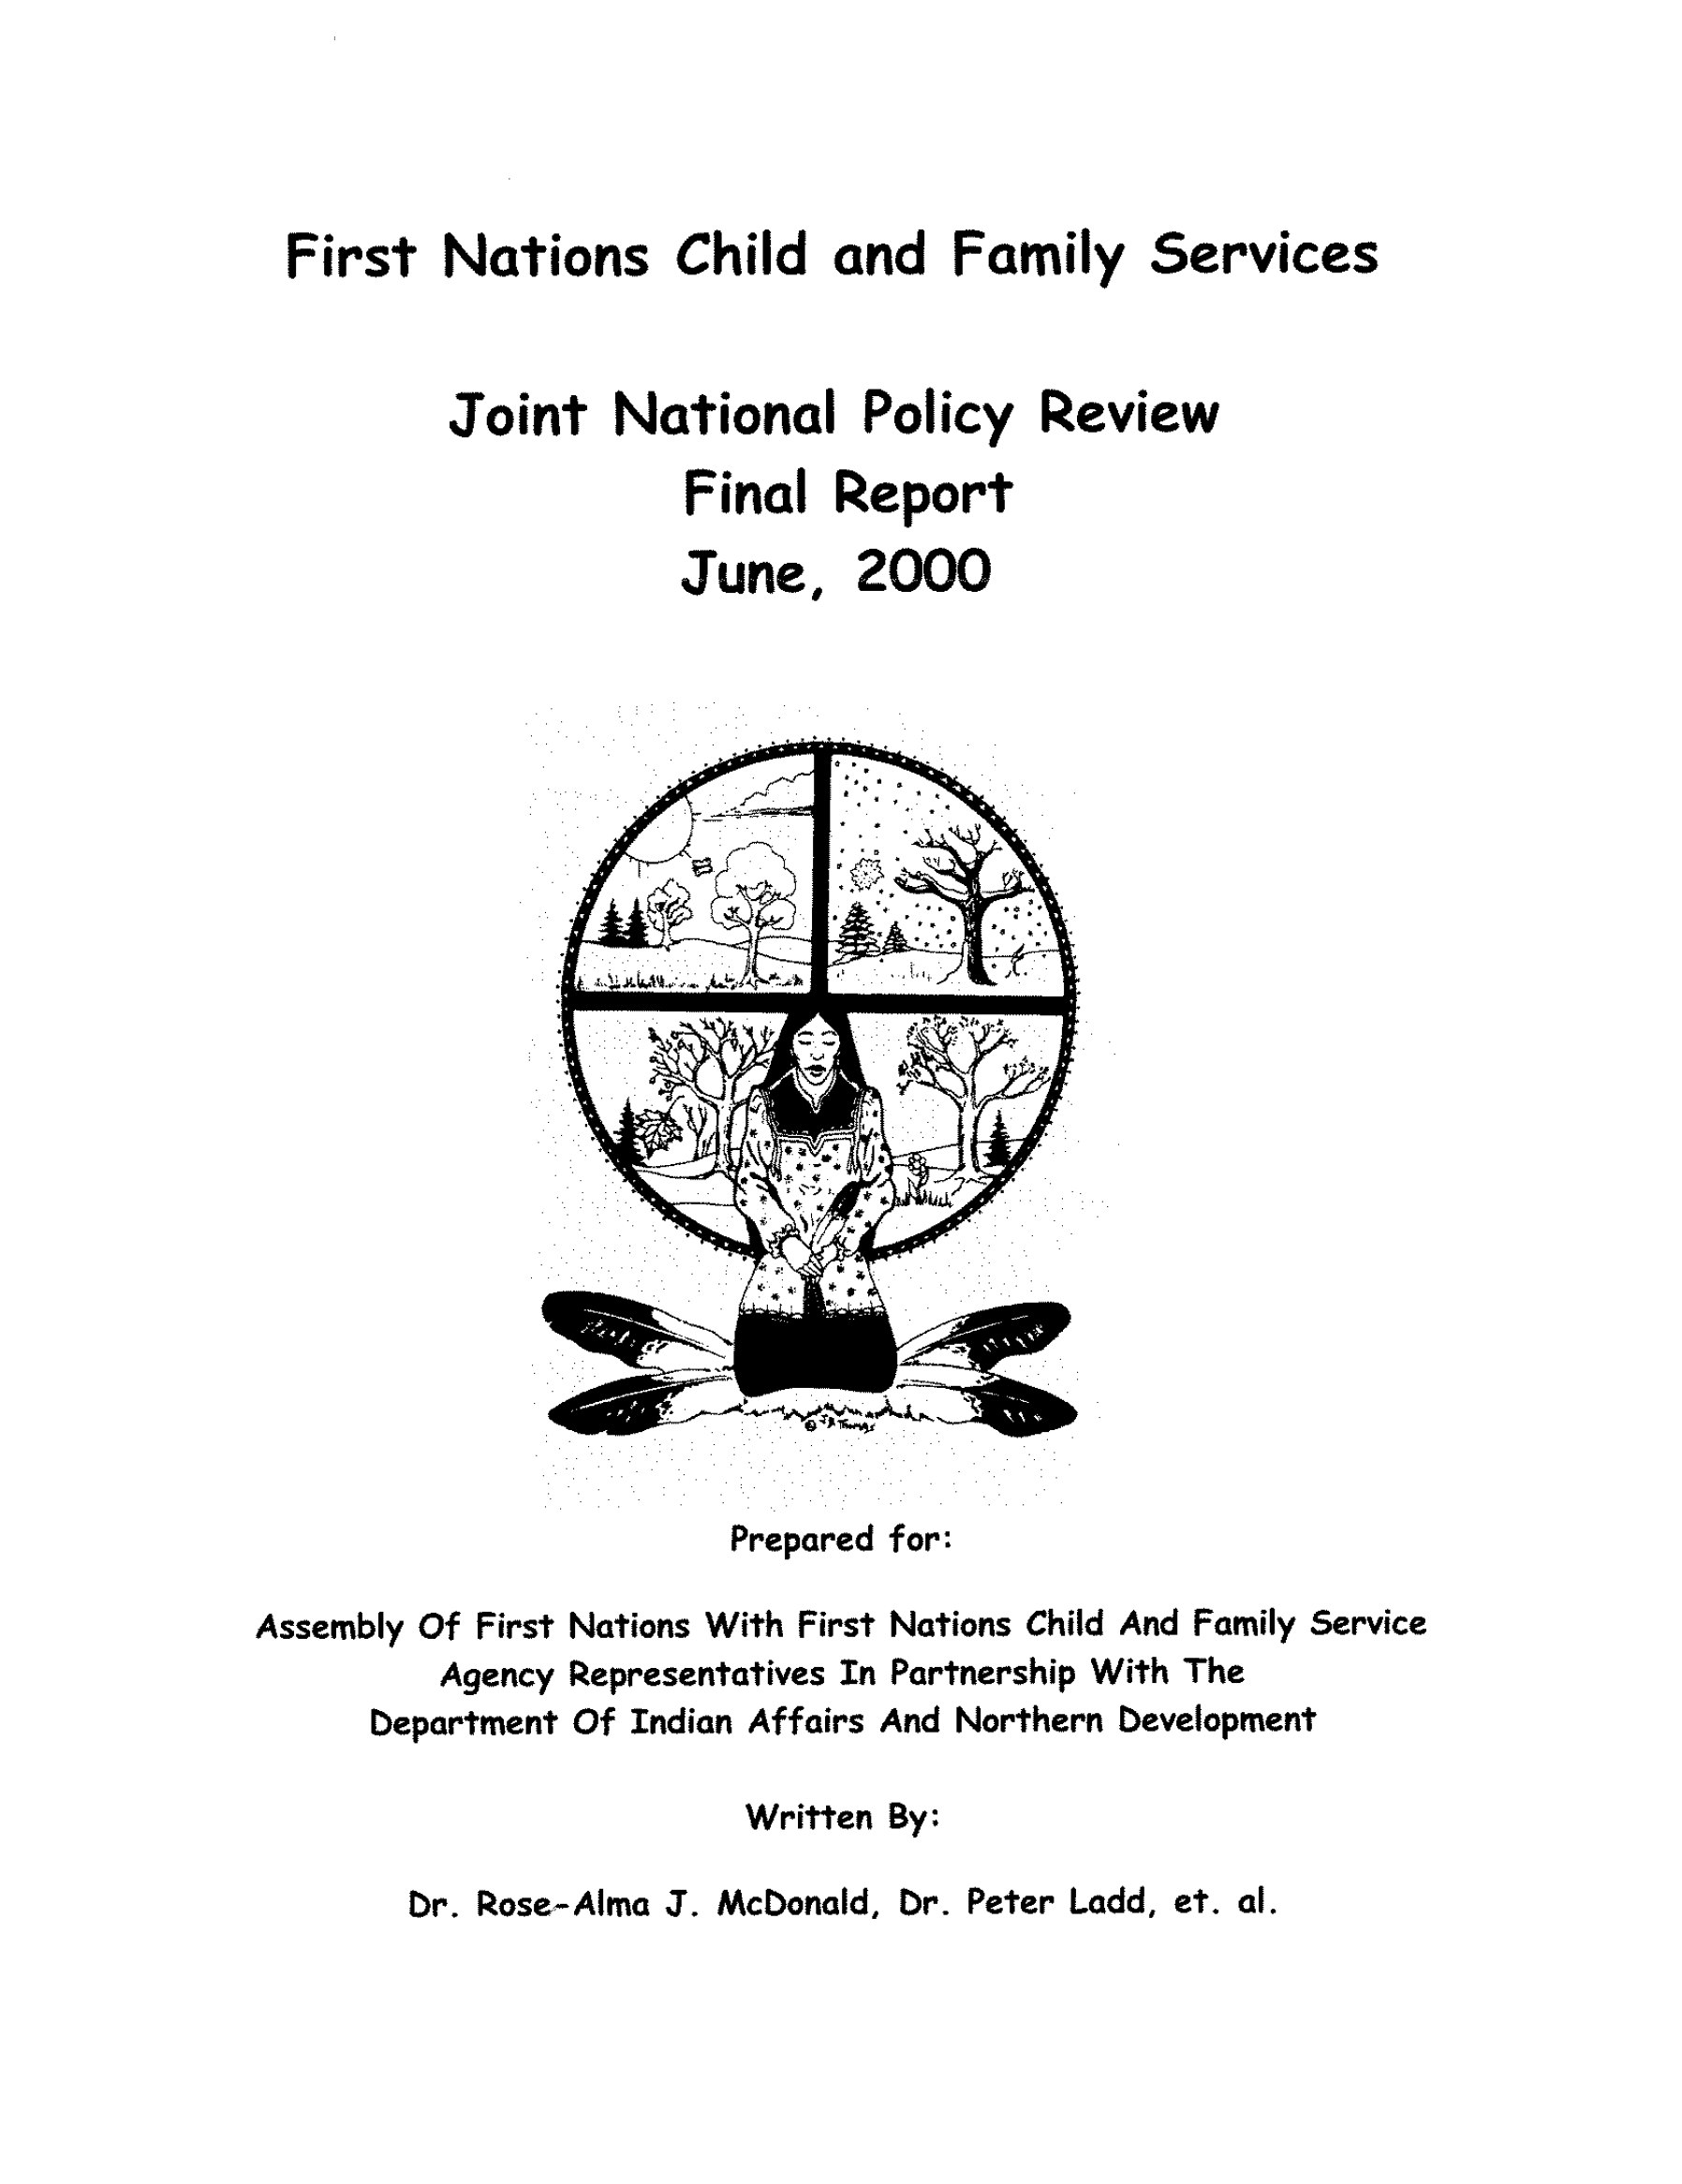 First Nations Child and Family Services Joint National Policy Review